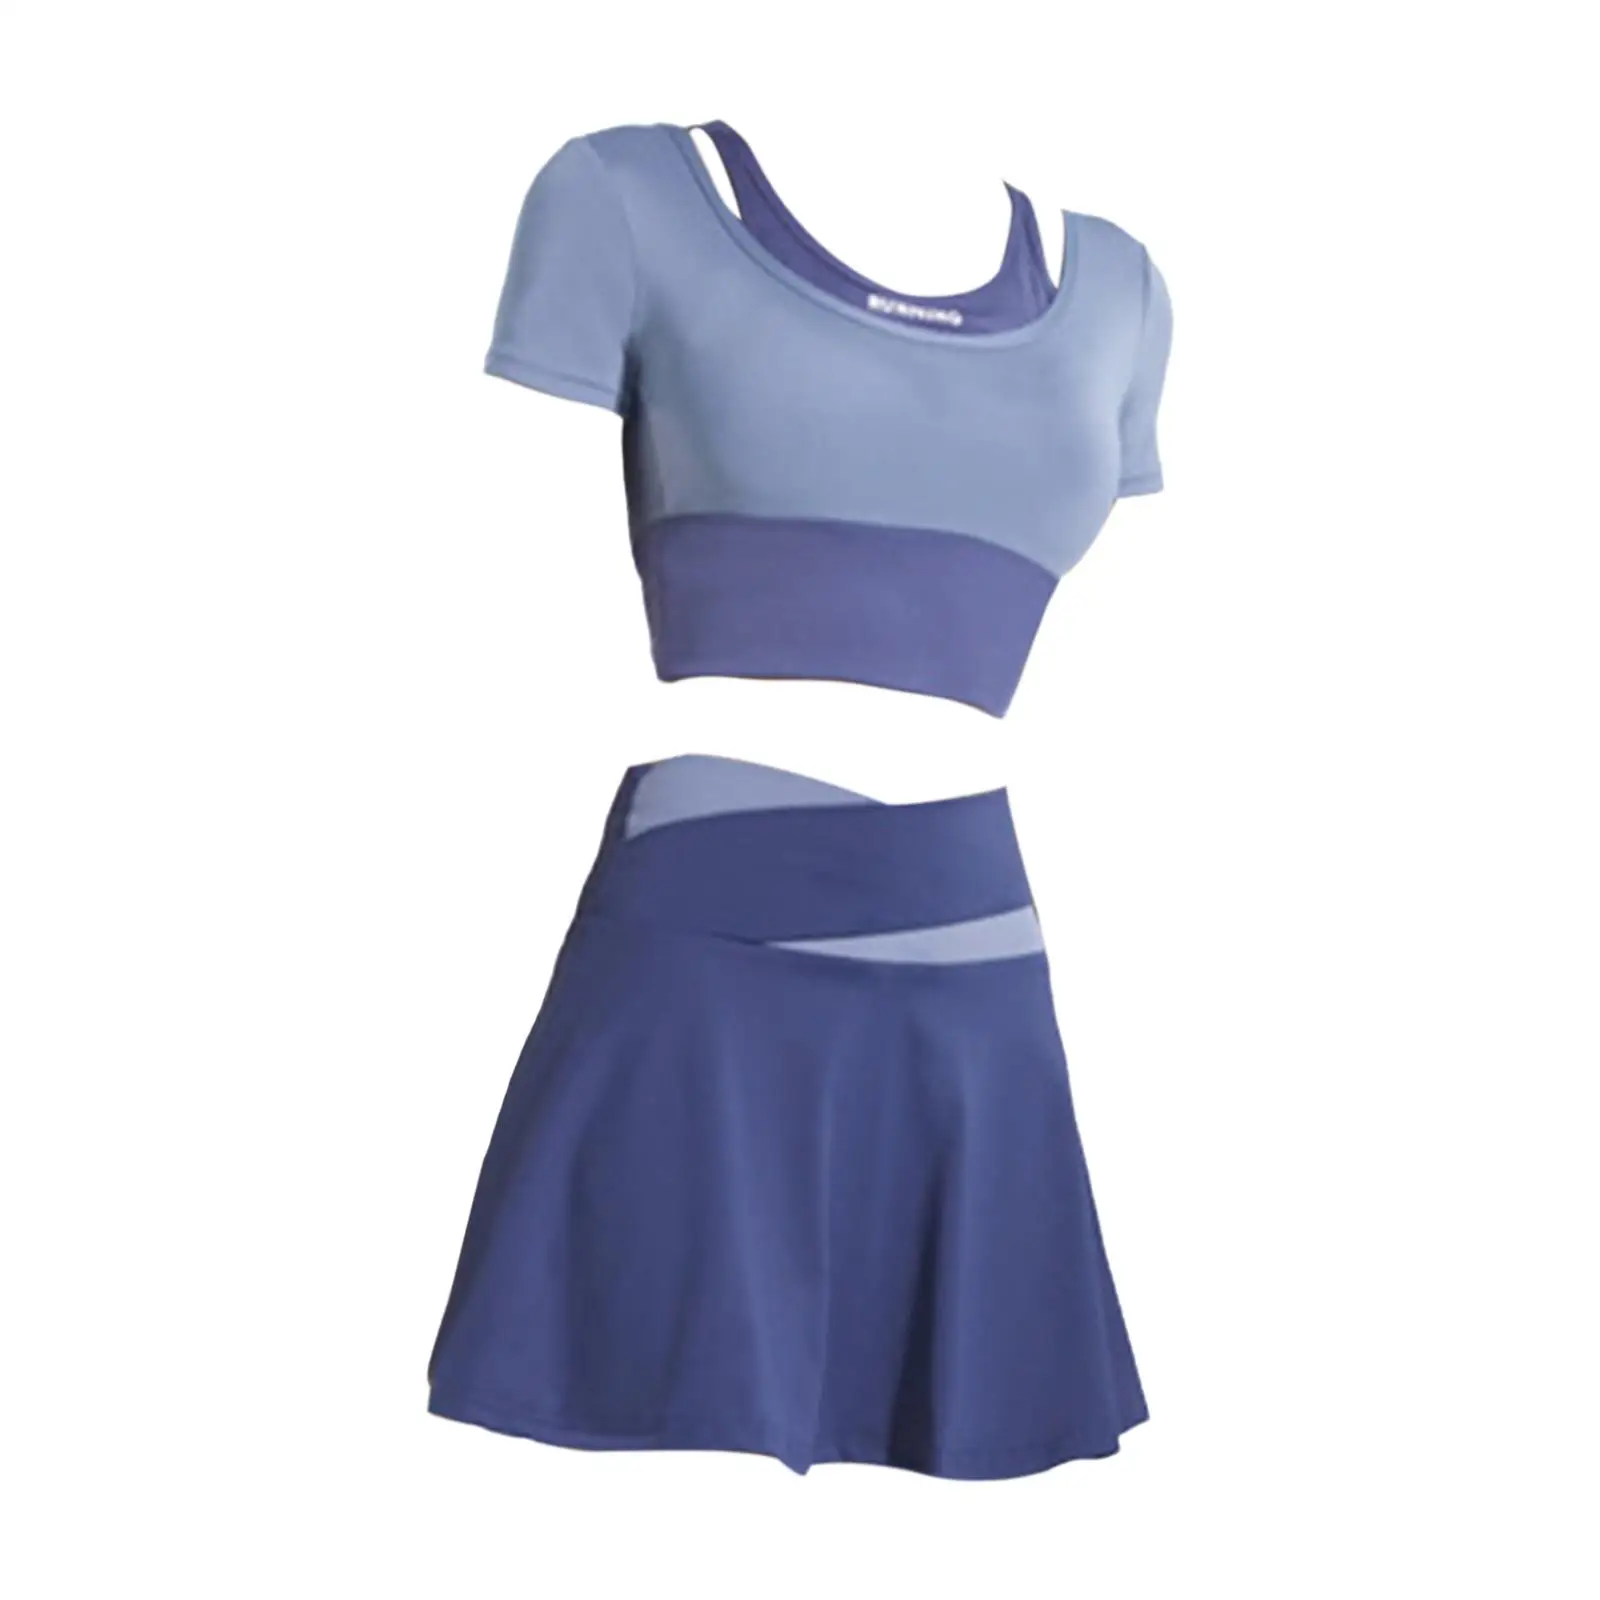 Workout Skirts Short Sleeve Suit Sportswear Tennis Skirts for Sports Fitness